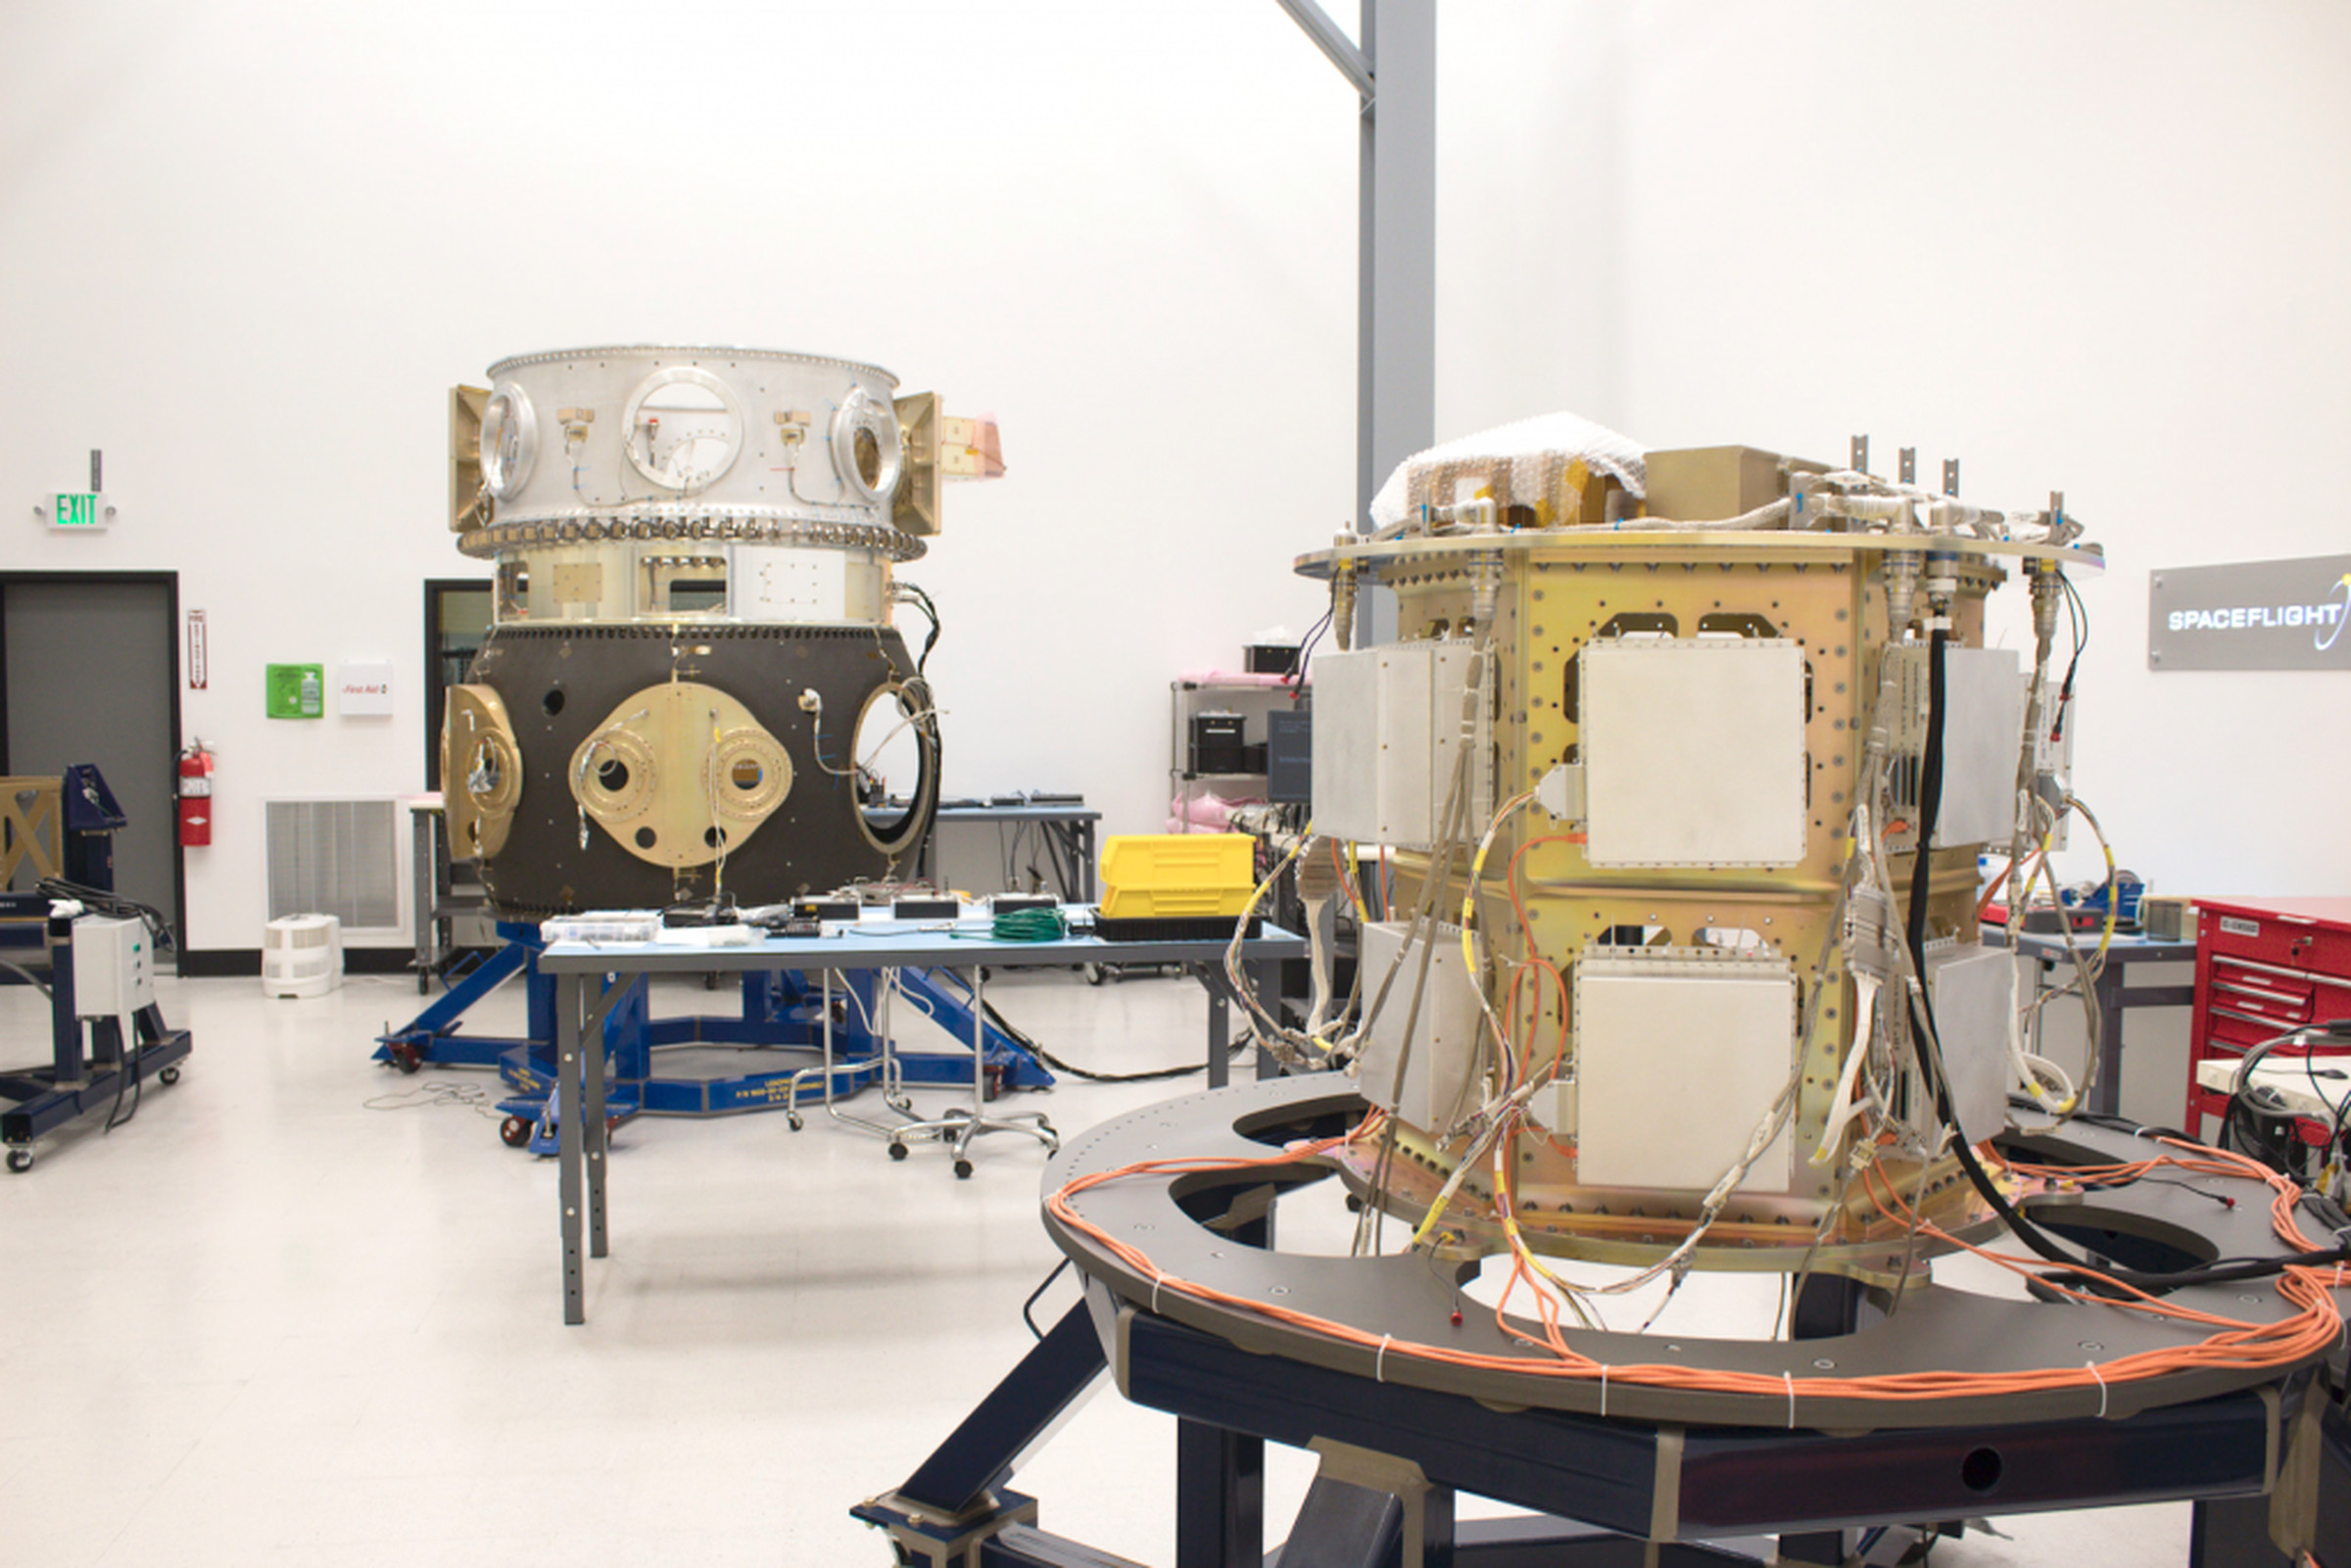 The satellites being integrated together for launch at Spaceflight’s Washington facility